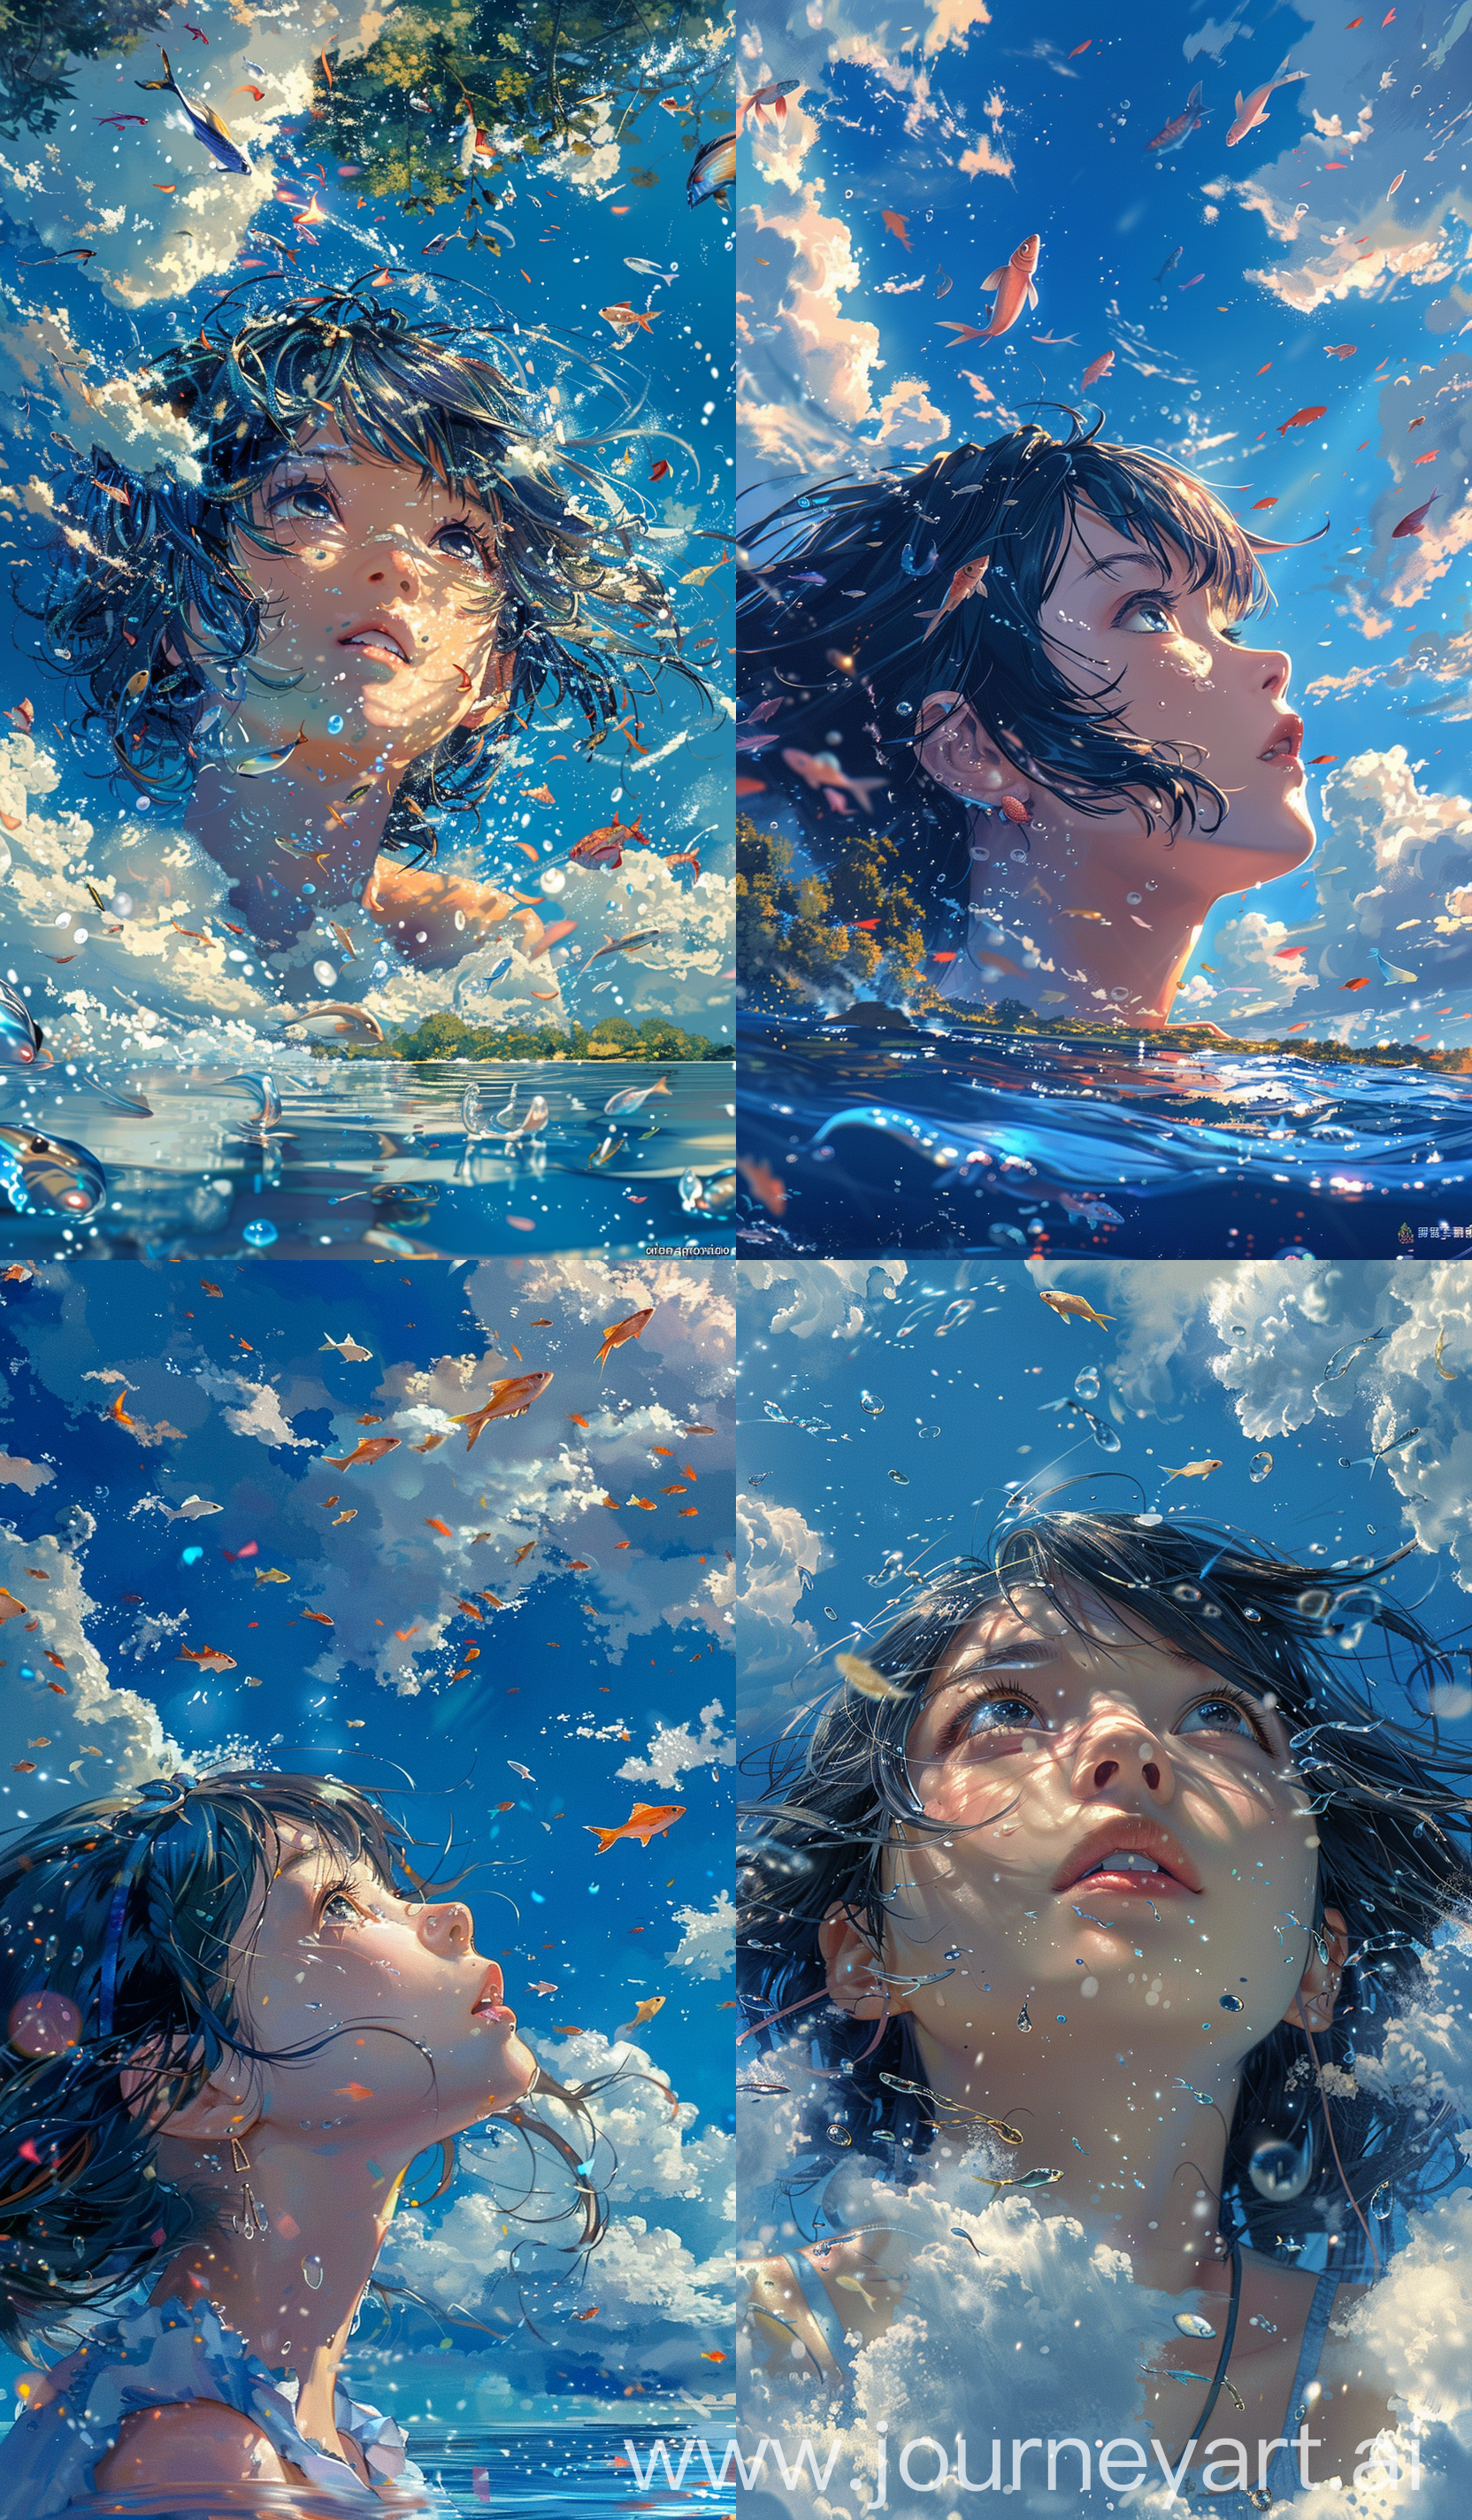 Beautiful anime scenary,mokoto shinkai style, cloud man, sky escape view, beautiful flying fish over sky, magical look, amazing clouds style, girl look above from calm water ,breeze, illustration, close up view, ultra HD, "high quality", sharp details, no hyperrealistic --ar 10:17 --s 400